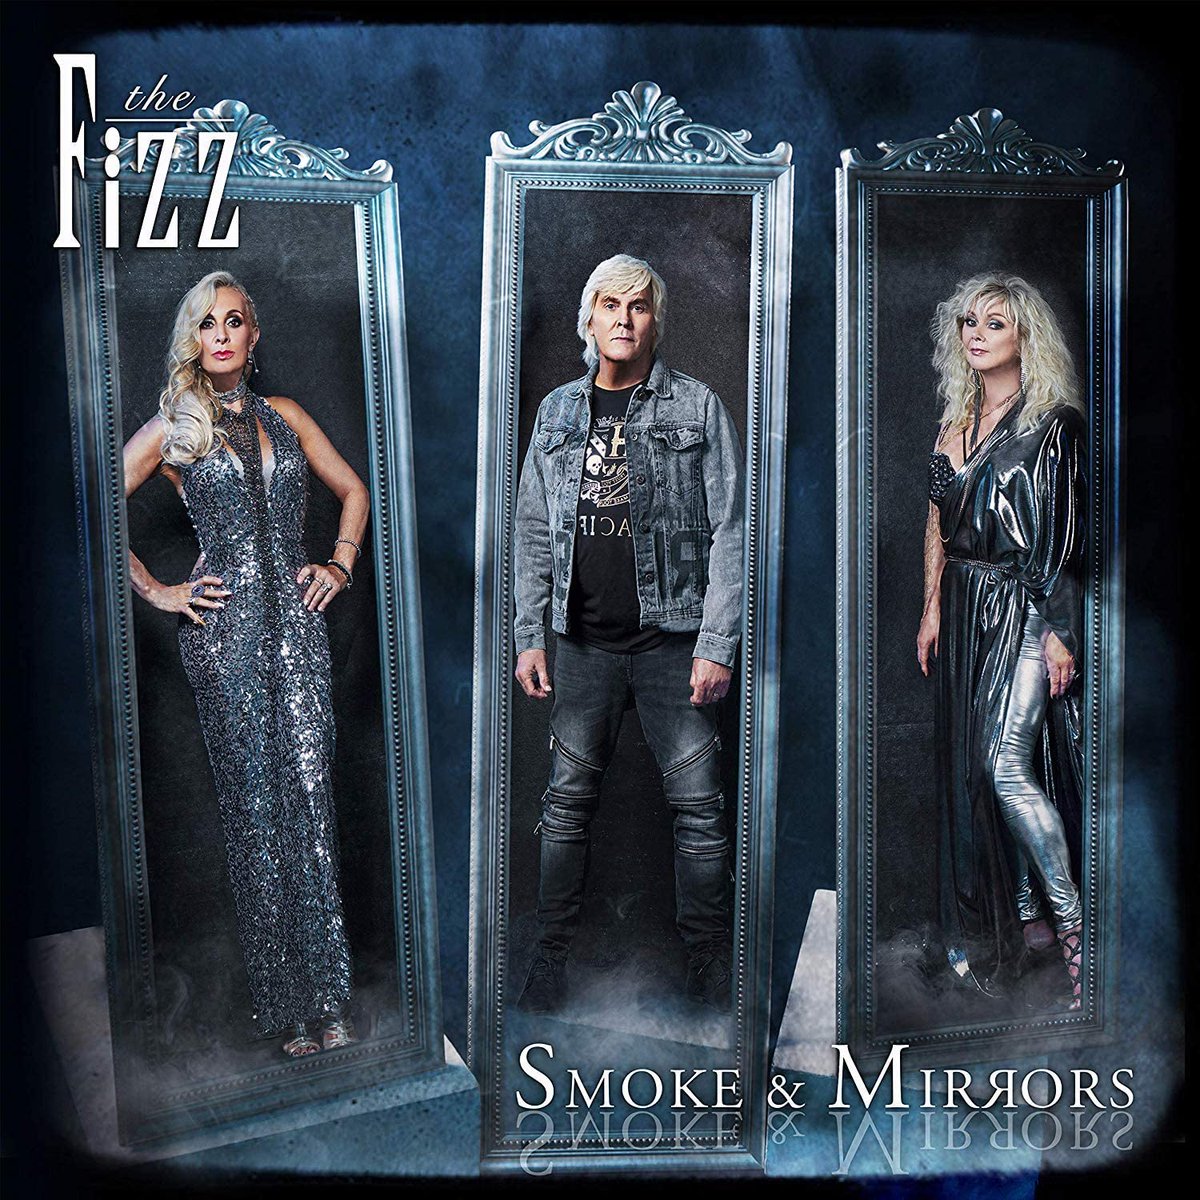 16. Smoke & Mirrors - The Fizz.It's hard to believe that this album came out at the beginning of March now!  There's also not a single bad track to be found here, IMO. Best tracks:Winning WaysThe World We Left BehindSecond To NoneNothing's Gonna Last Forever